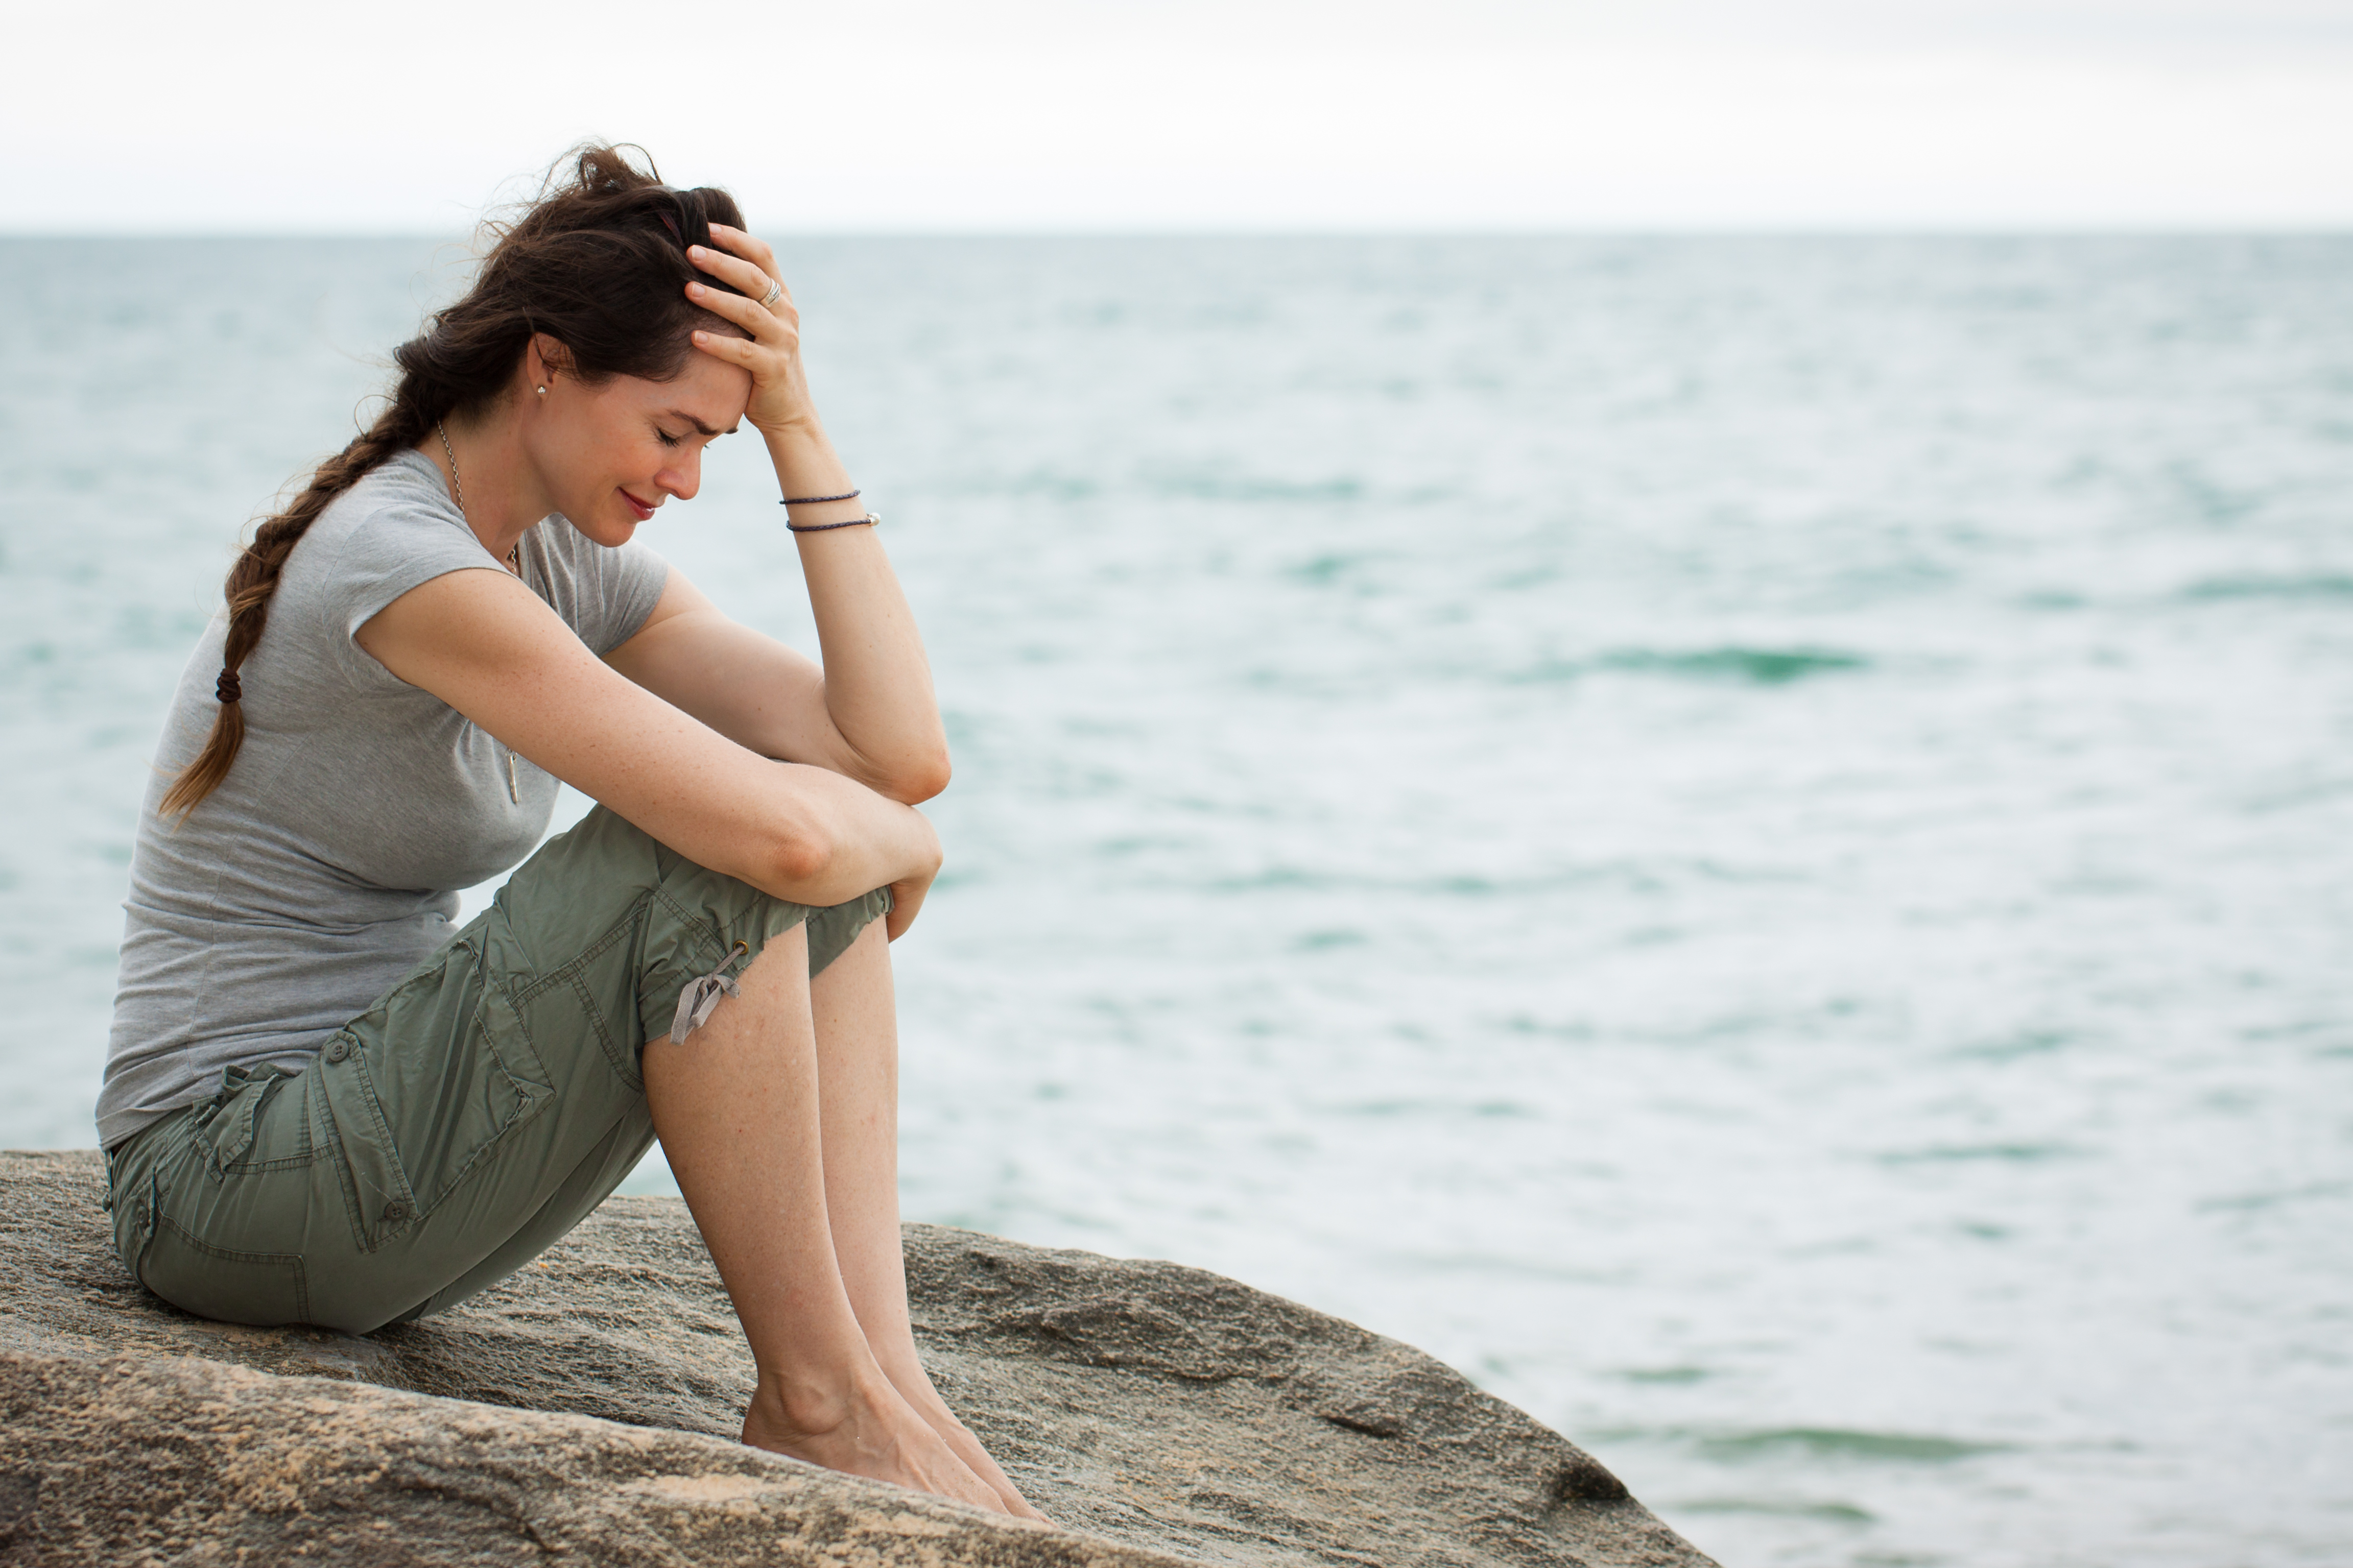 Fibromyalgia Patients Often Struggle with Depression and Anxiety, Survey Reports